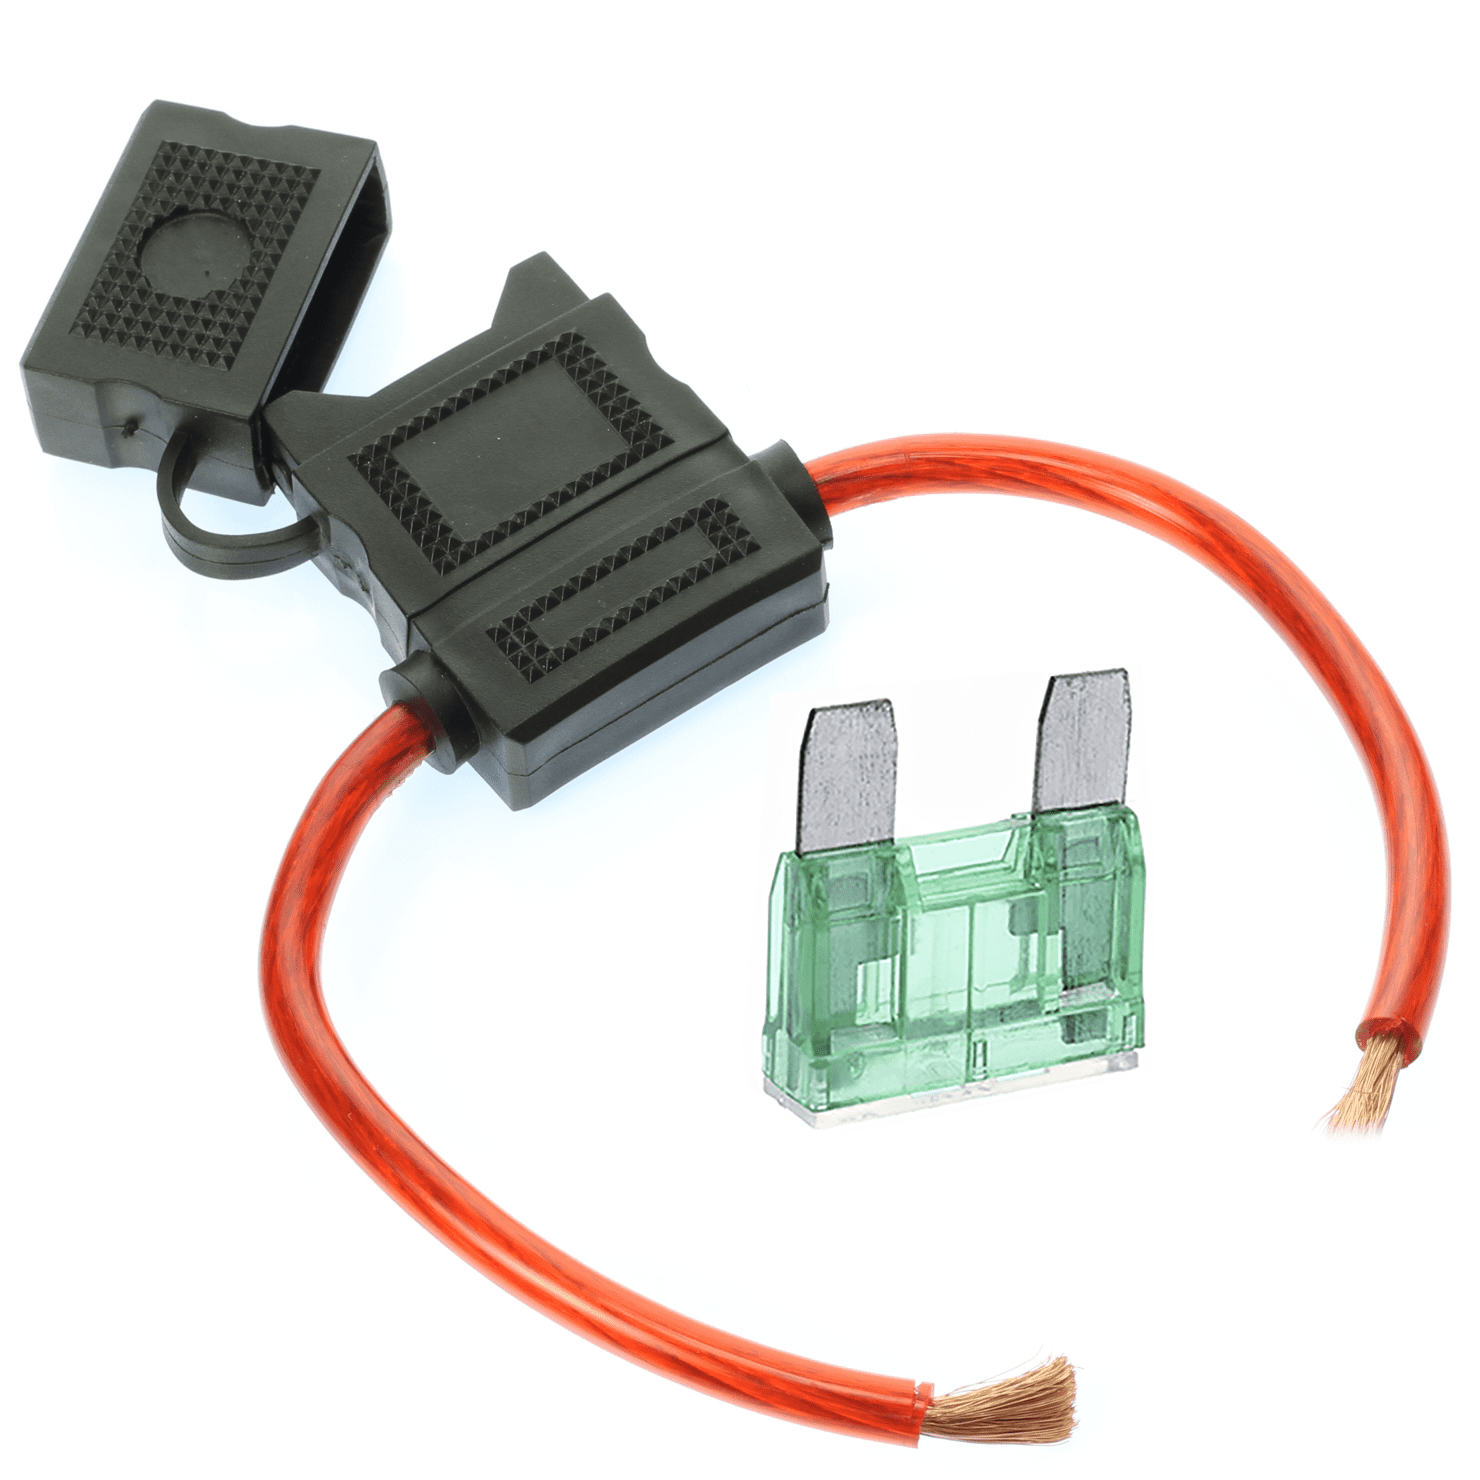 Boat Marine Watertight Inline Fuse Holder 50 Amp Fits 1/4" X 1-1/4" Fuses